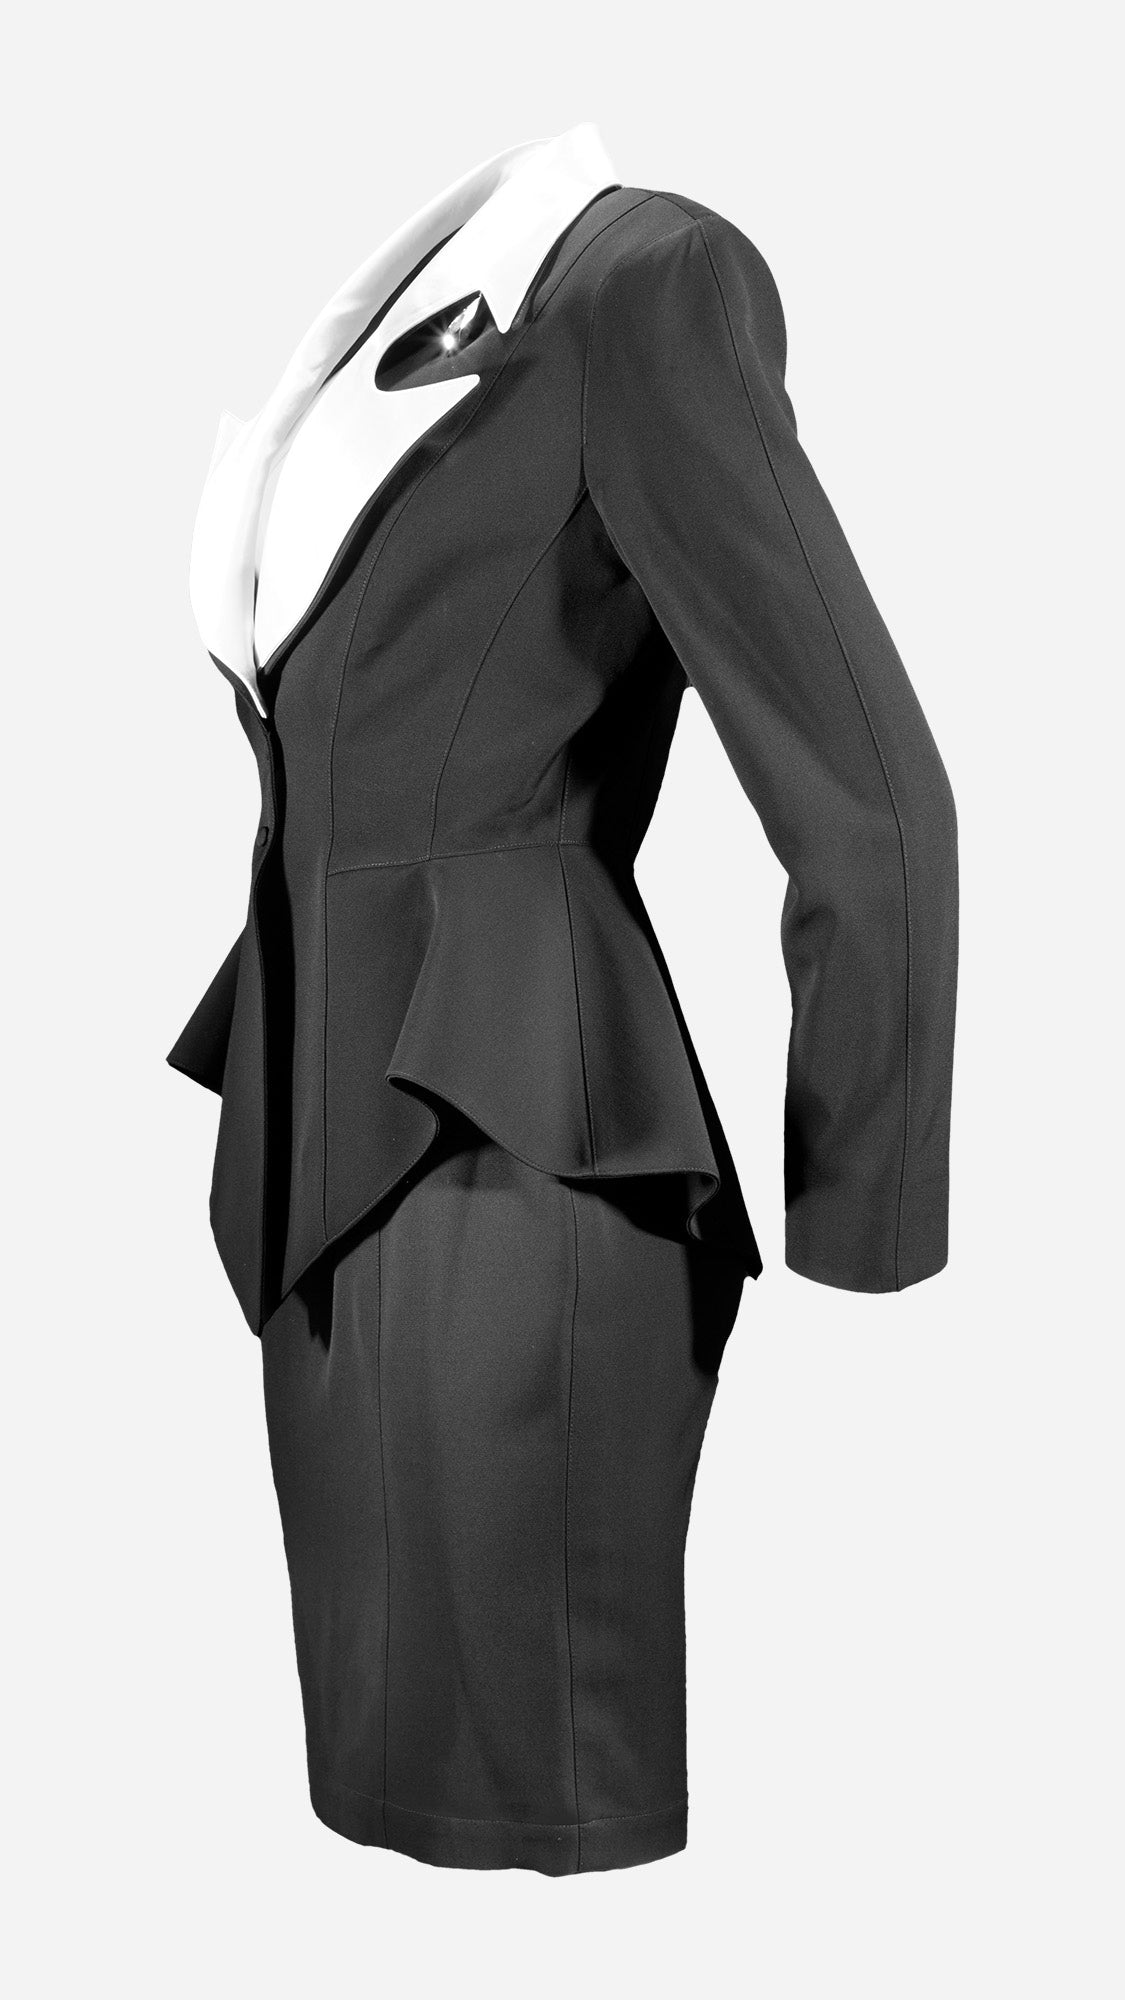  Thierry Mugler F/W 1992 Archival Black Skirt Suit with White Satin Notched Lapels SIDE 2/10